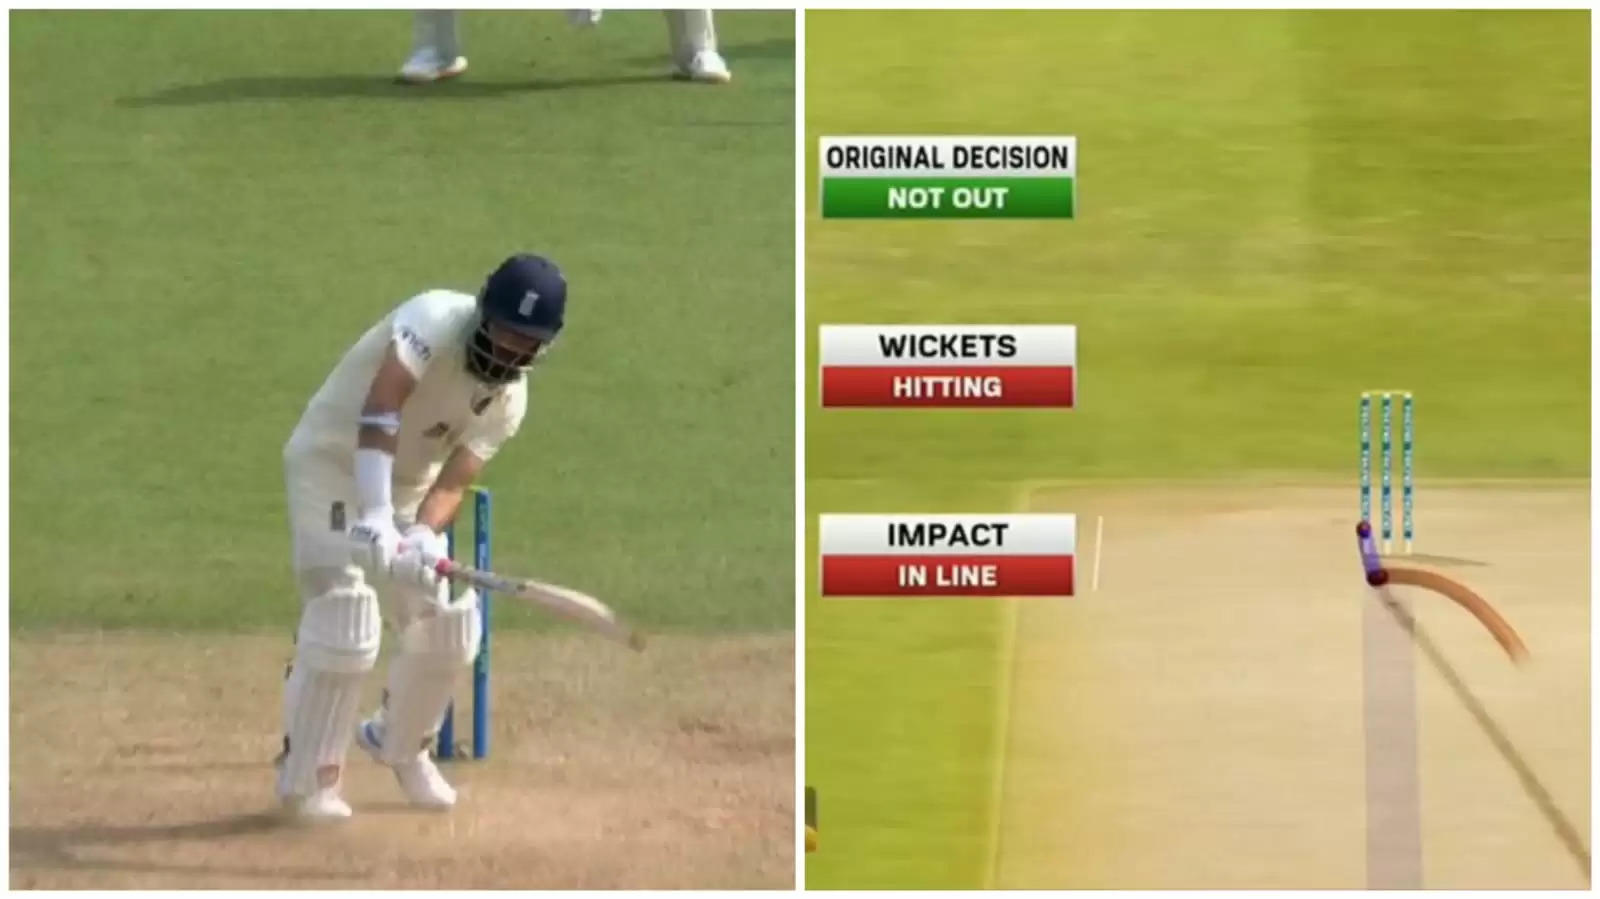 Jasprit Bumrah traps Moeen Ali in front; nobody appeals but ball tracking shows all reds